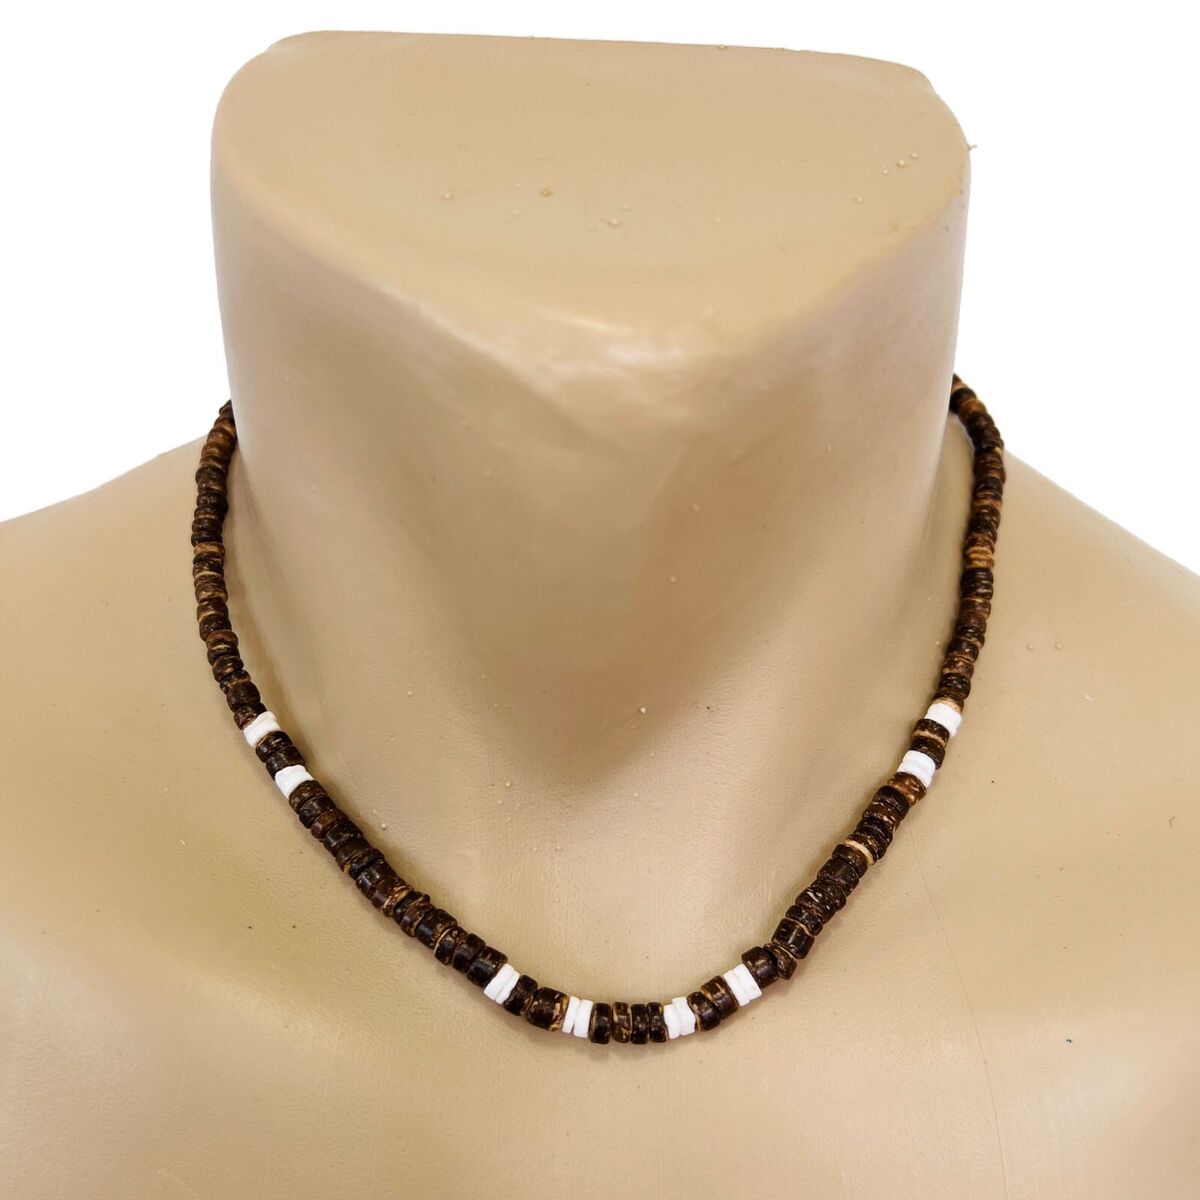 Lanai Coconut Shell Discs Brown Mens Bead Choker Necklace